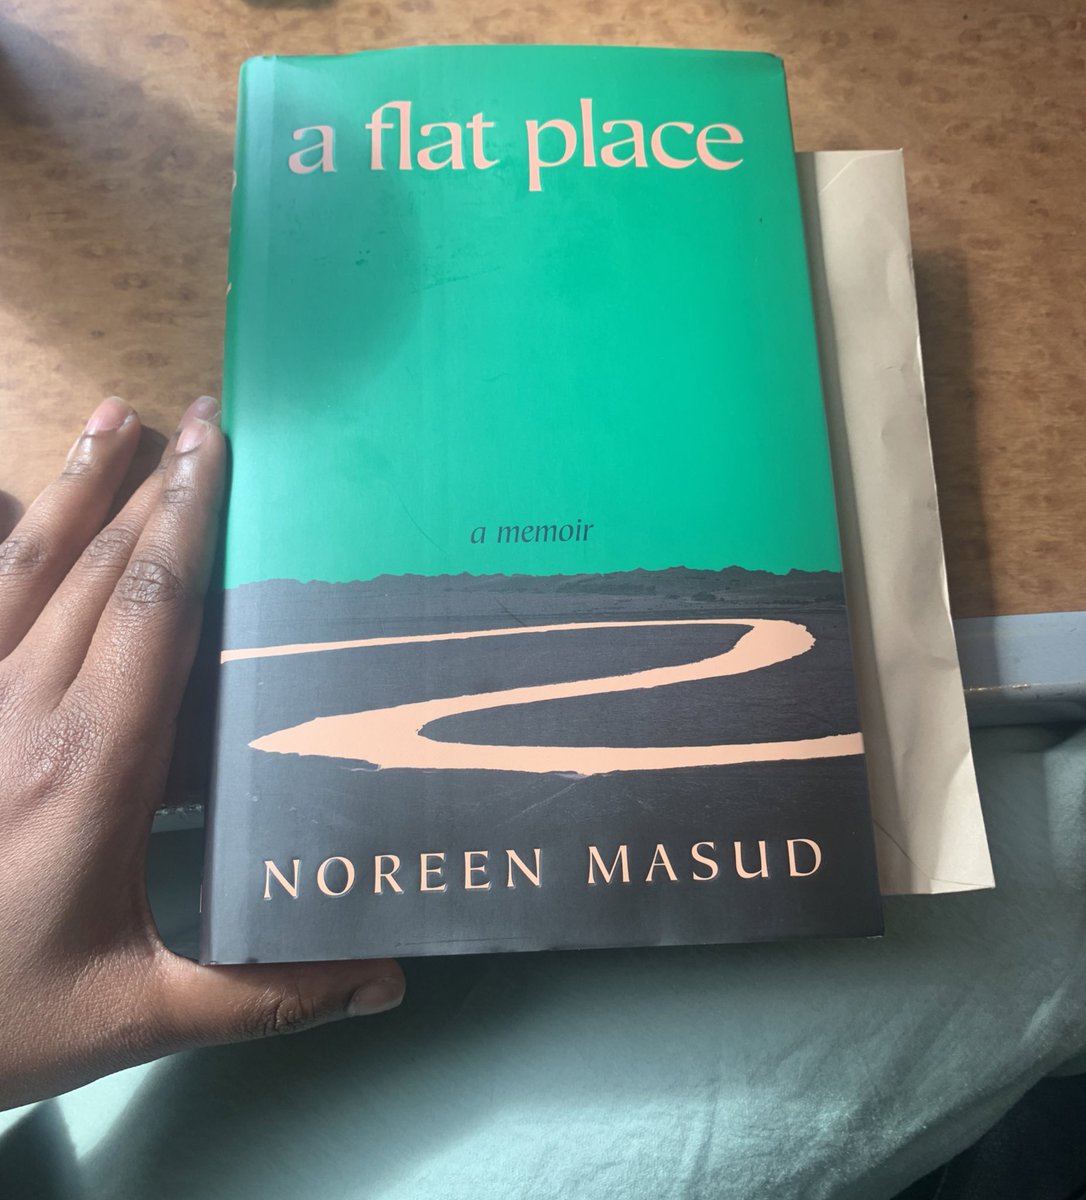 Your book is so achingly beautiful @NoreenMasud I just can’t put it down. 

I’m just a chapter away from the one dedicated to the Newcastle Moor- can’t wait to get to it and feel even more connected to your writing :)